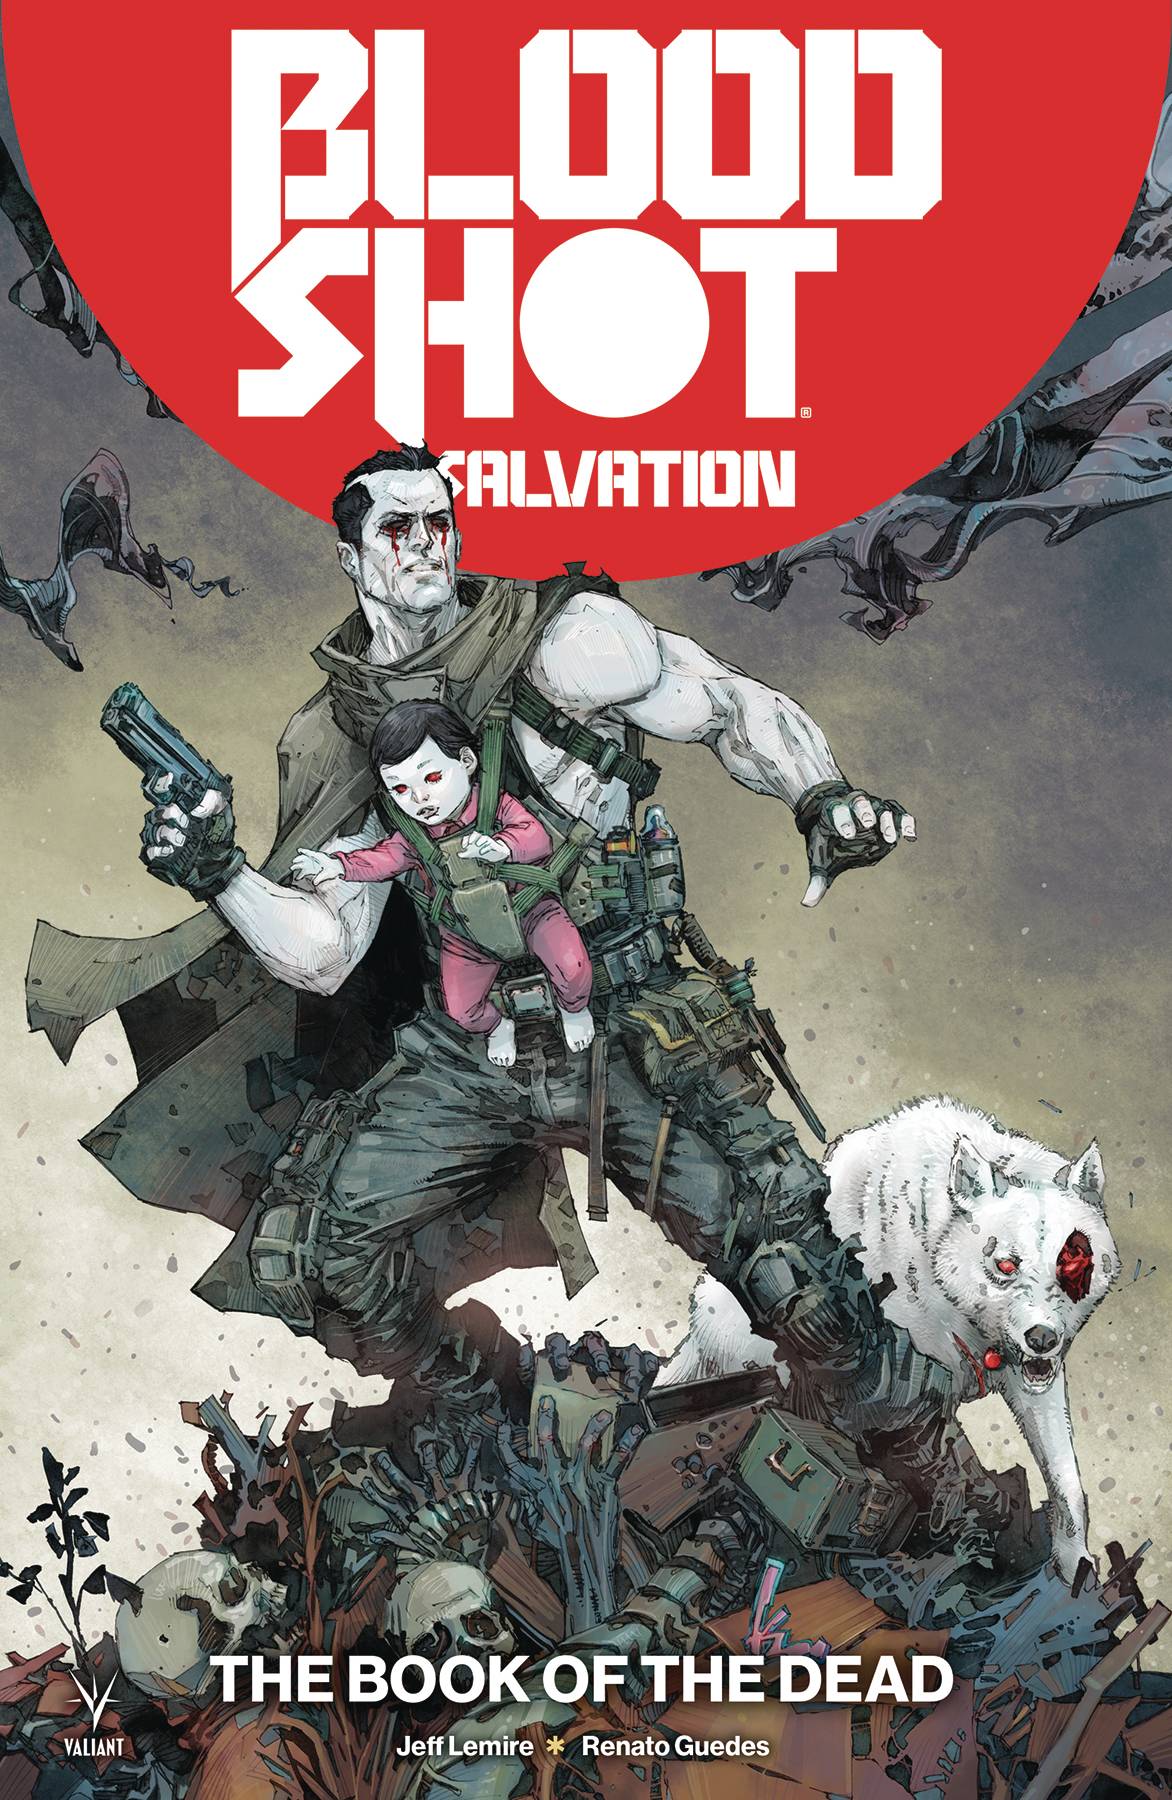 BLOODSHOT SALVATION TP VOL 02 THE BOOK OF THE DEAD